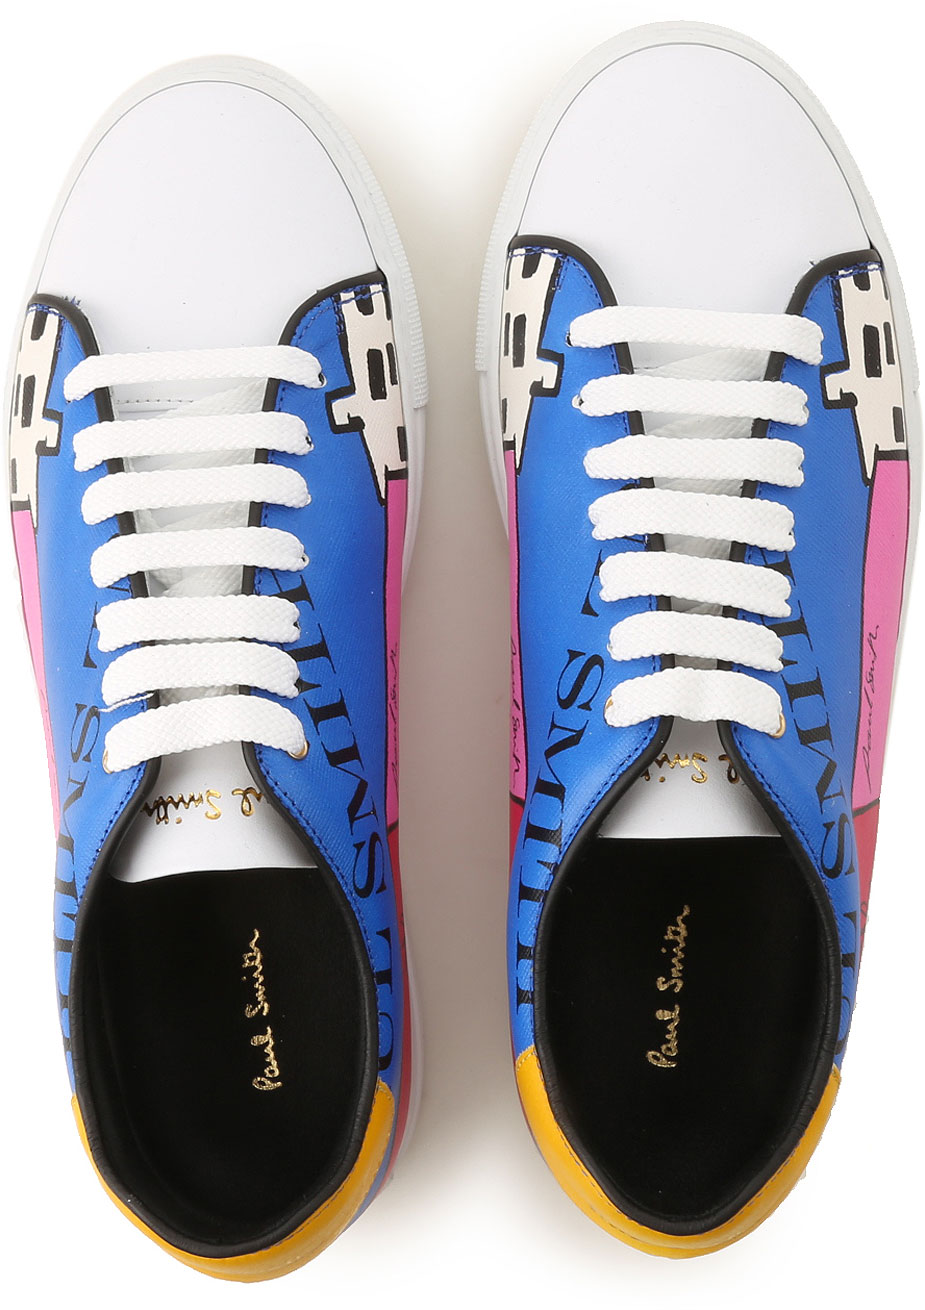 Womens Shoes Paul Smith, Style code: w1s-bas19-adw